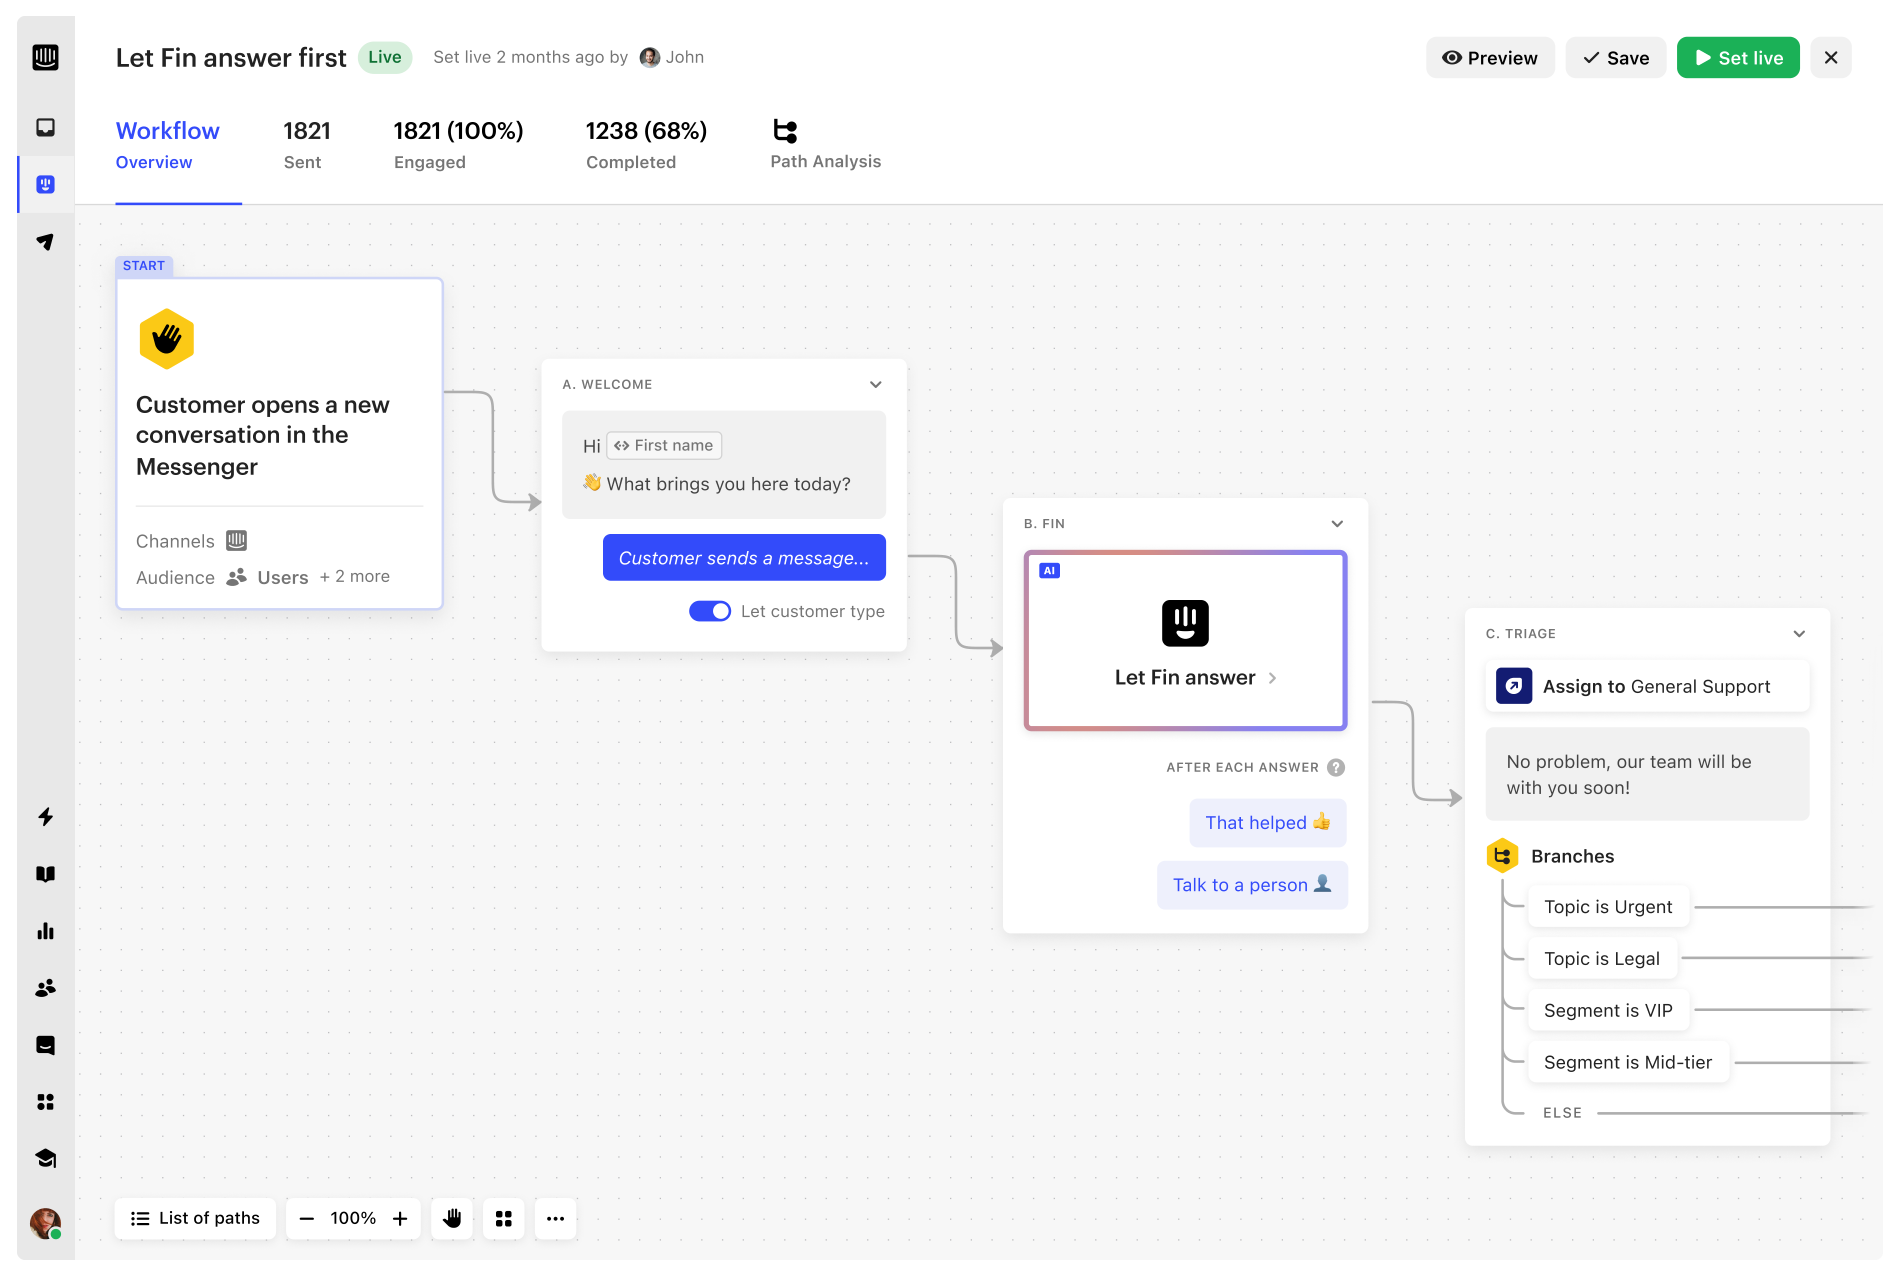 Workflows - Build powerful automations with our no code visual builder.